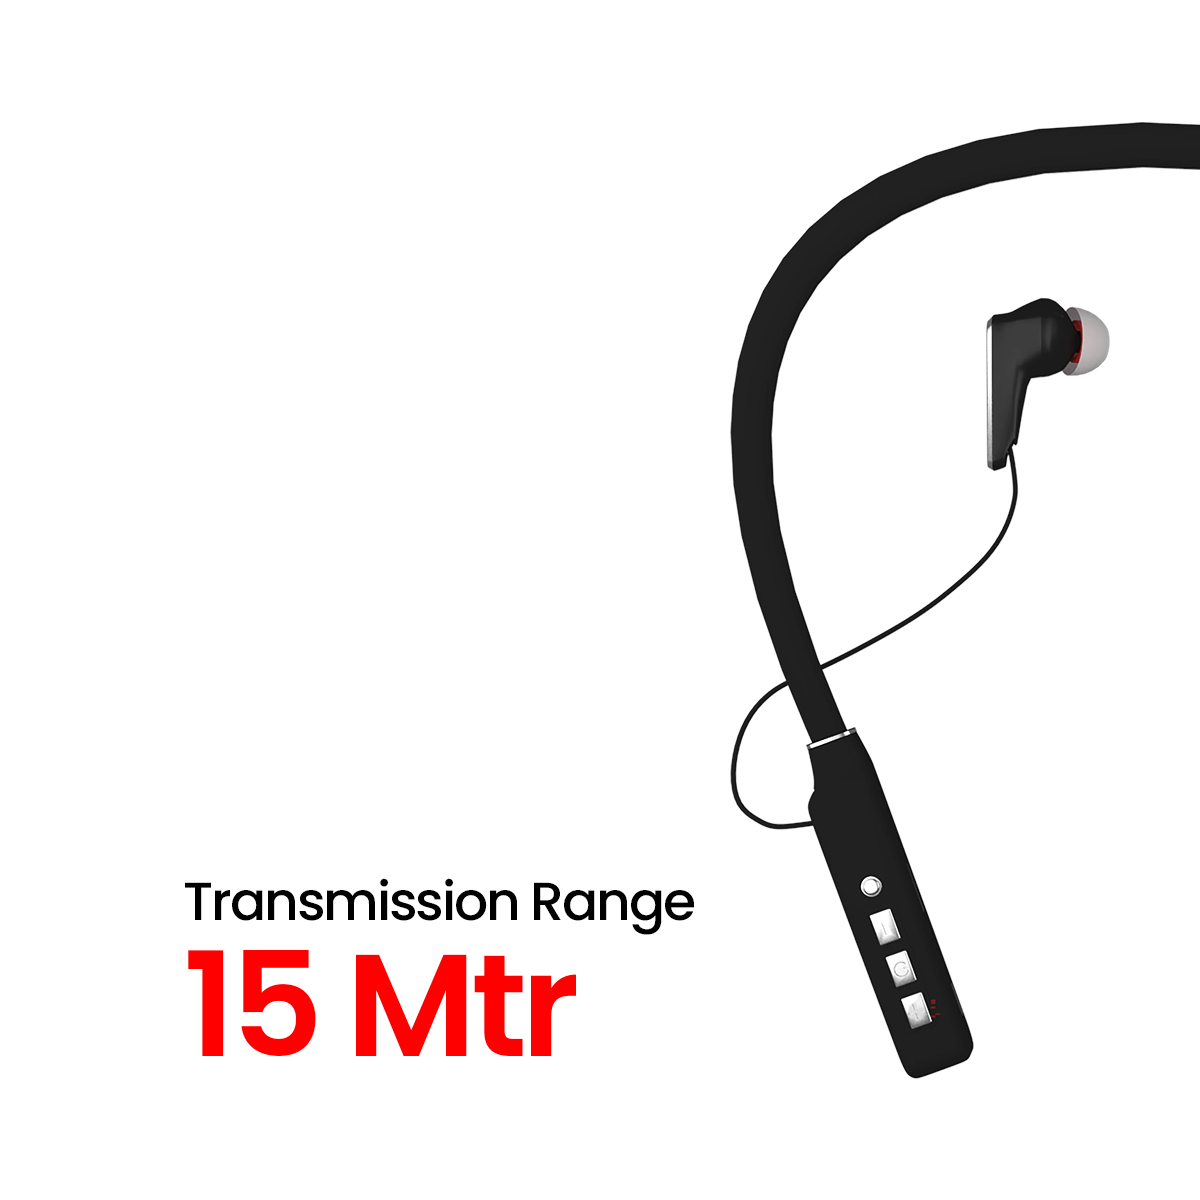 BT 500 - THE ULTIMATE ON-THE-GO MUSIC COMPANION!